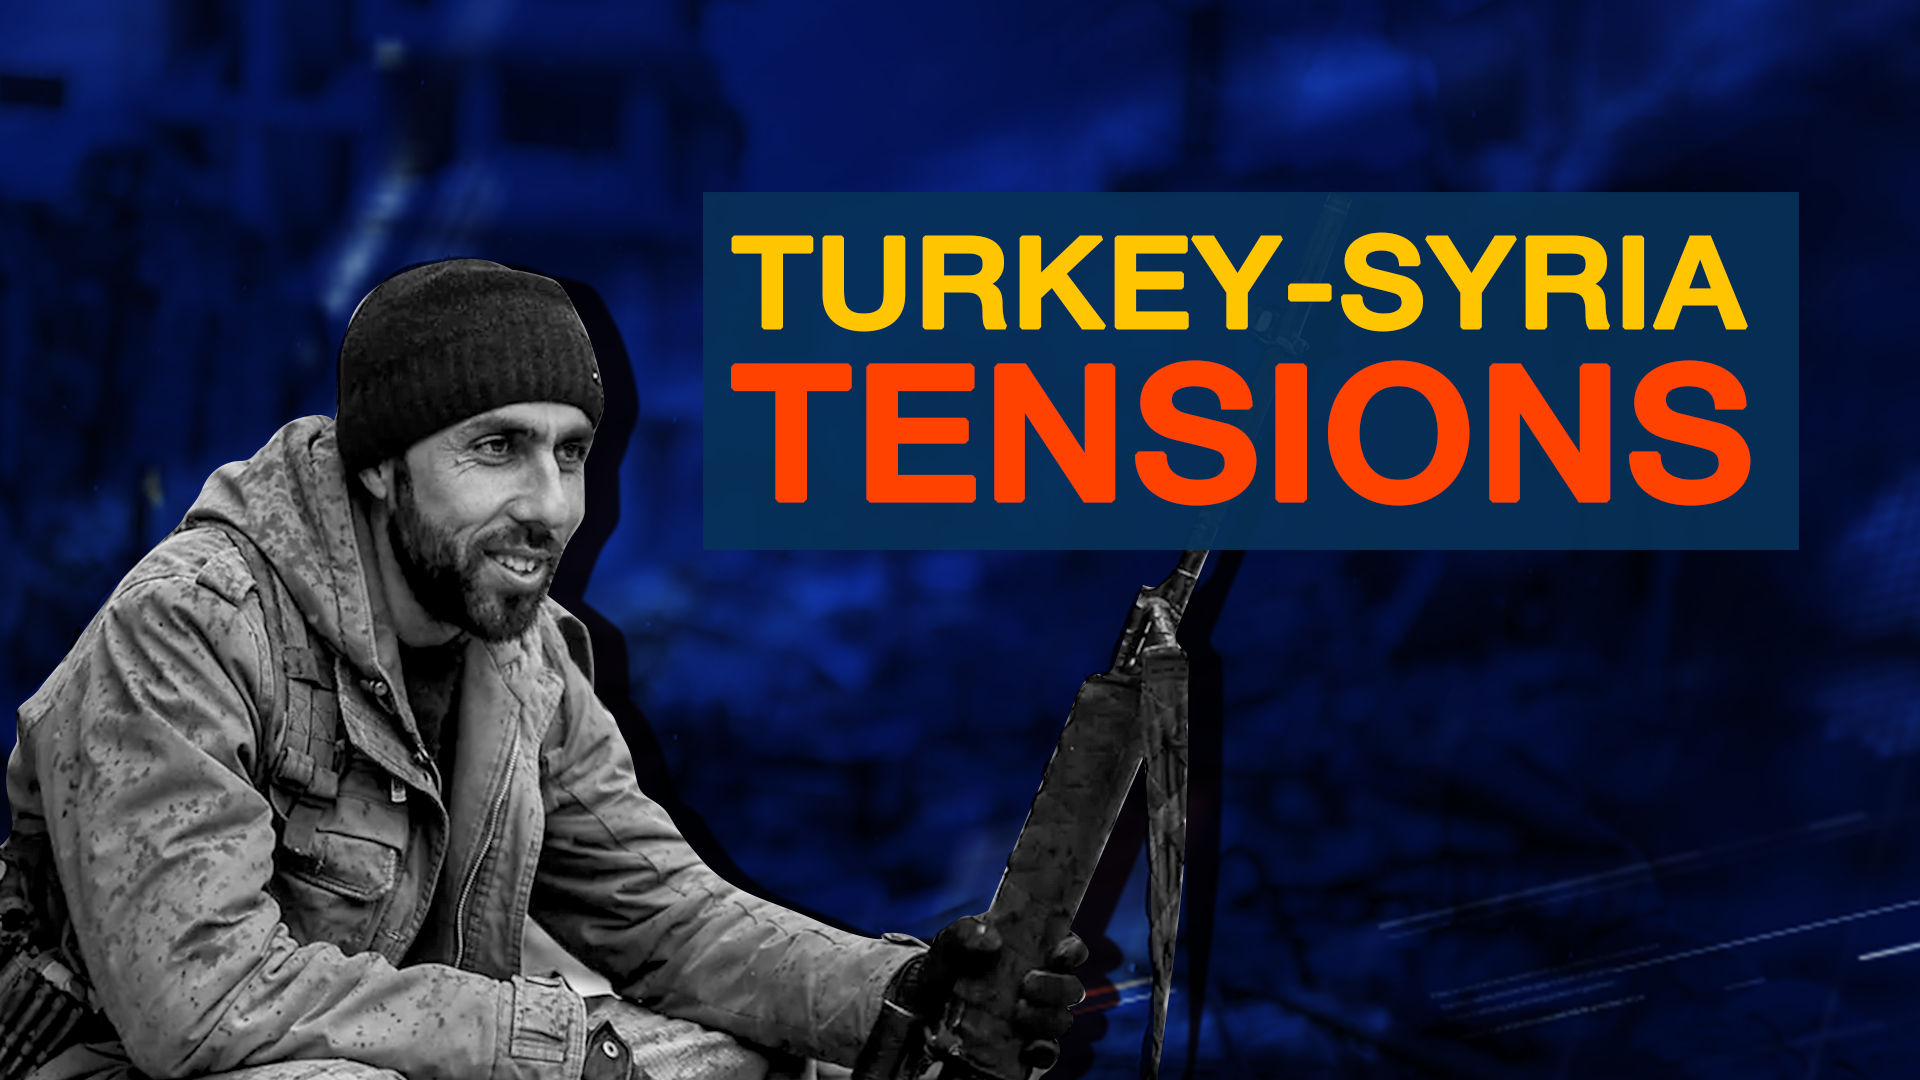 Turkey’s intentions in Syria